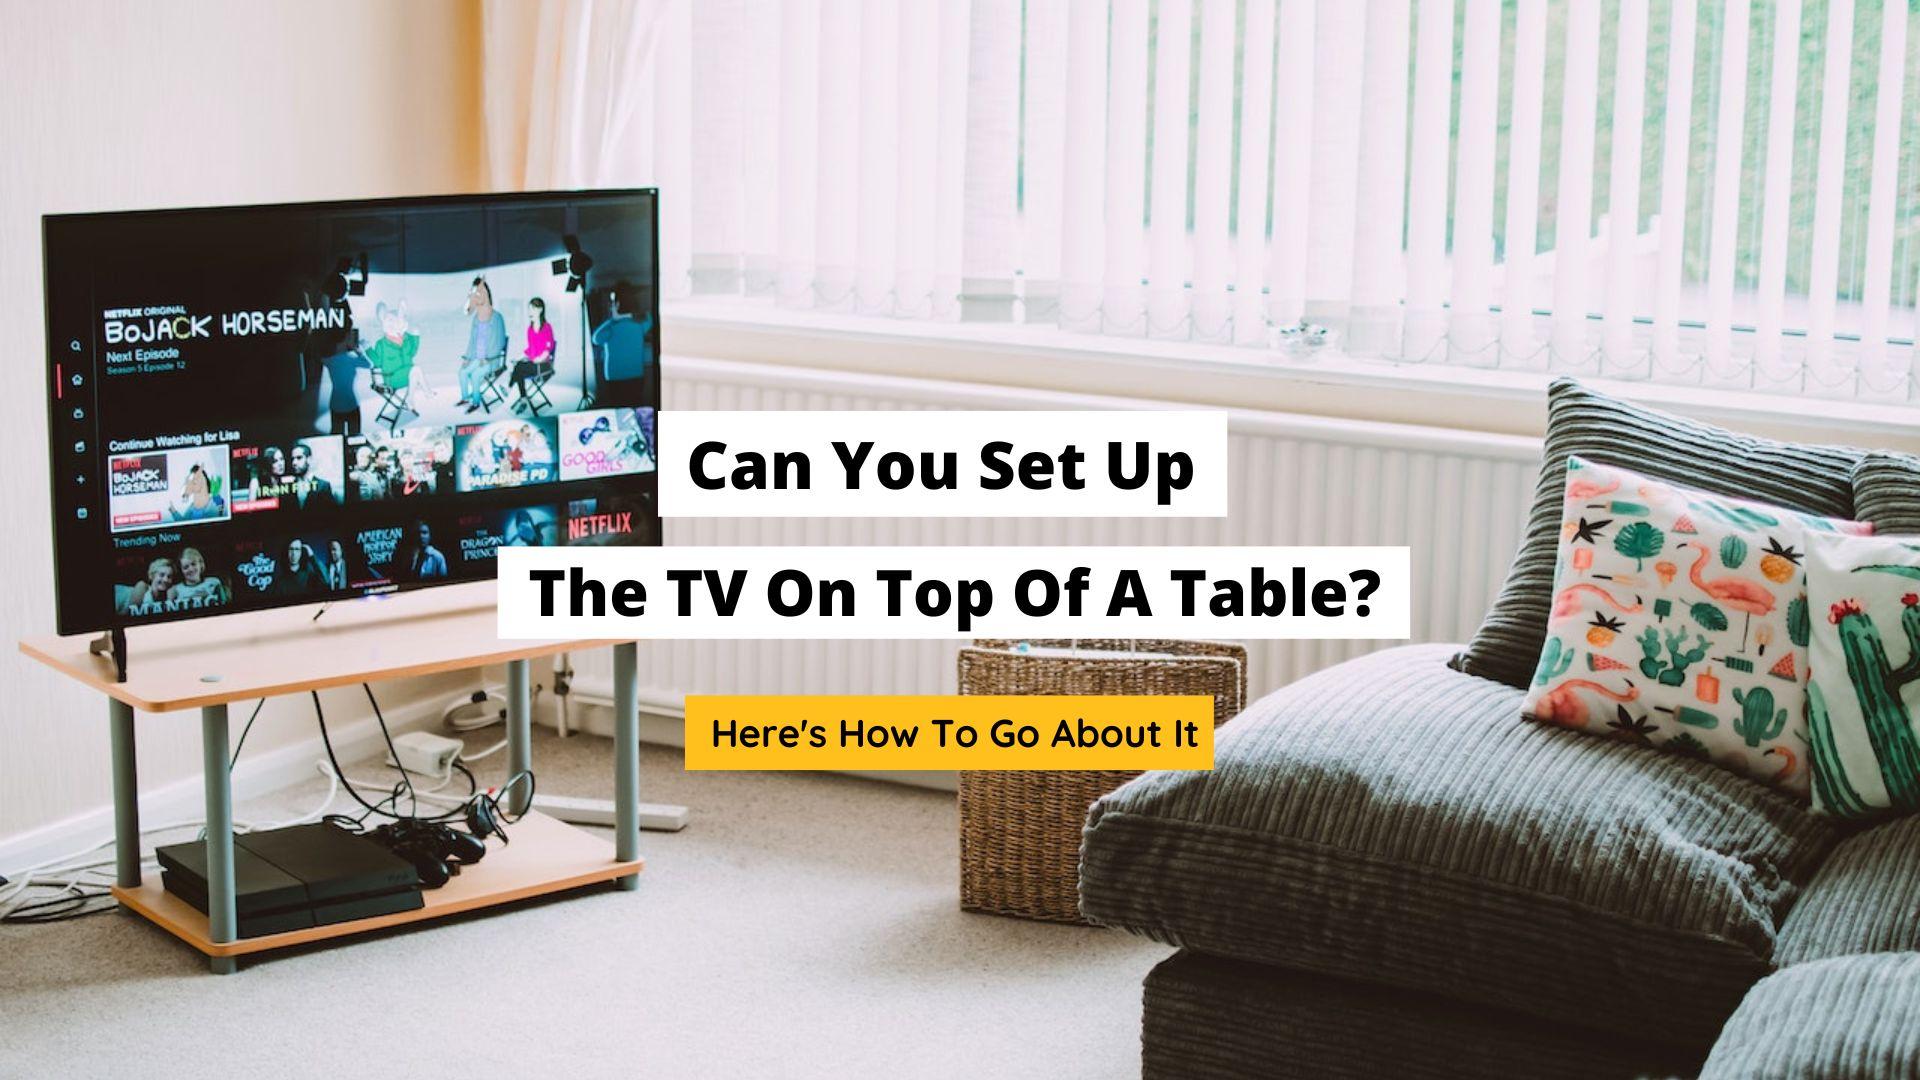 Can You Set Up The TV On Top Of A Table